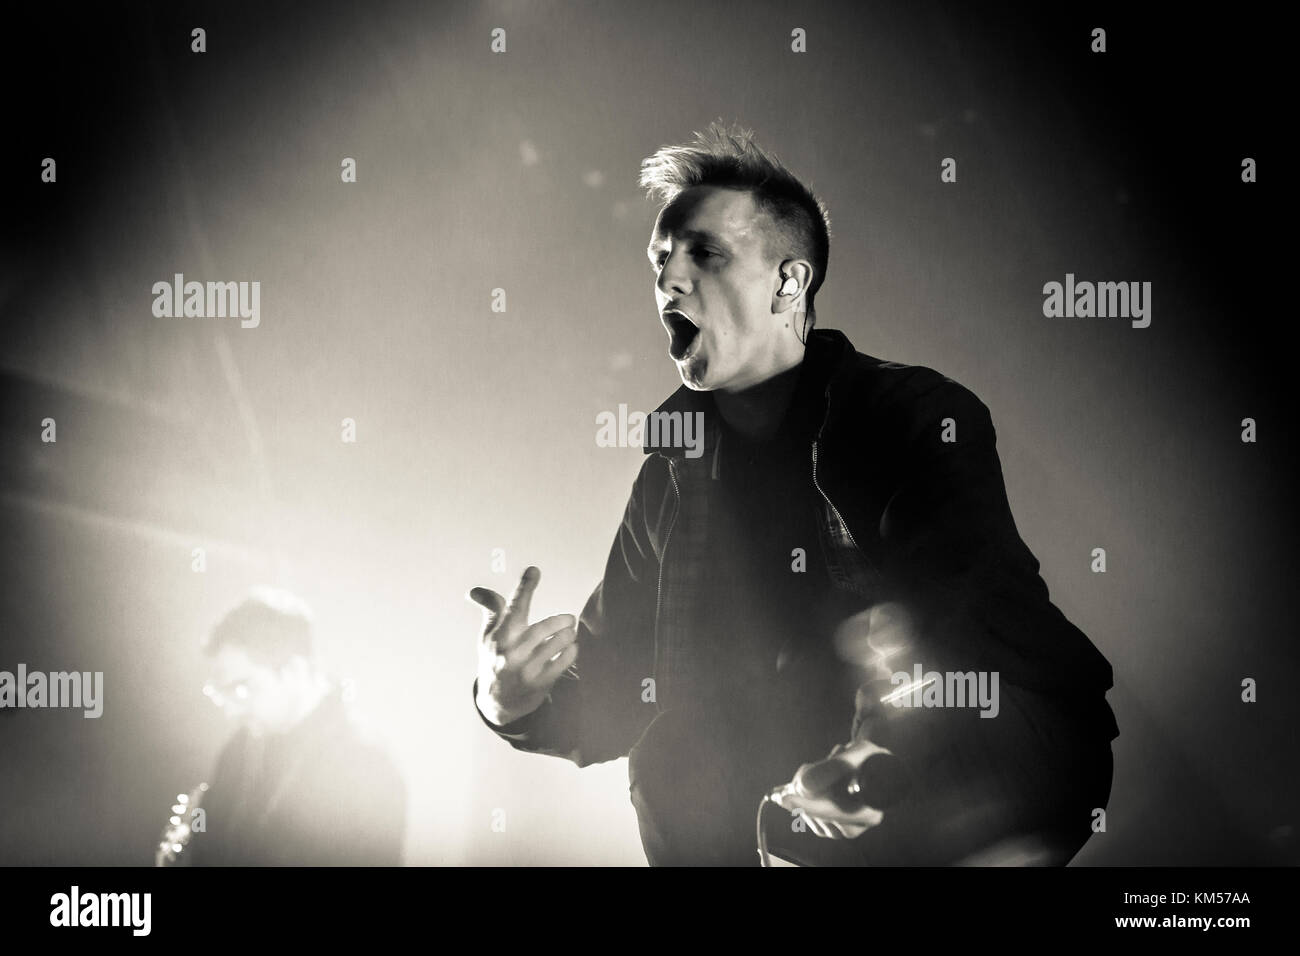 The German indie rock band Kraftklub combines different genres such as rock and rap and here performs a live concert at Palladium in Cologne. Here vocalist Felix Brummer is pictured live on stage. Germany, 26/02 2015. Stock Photo